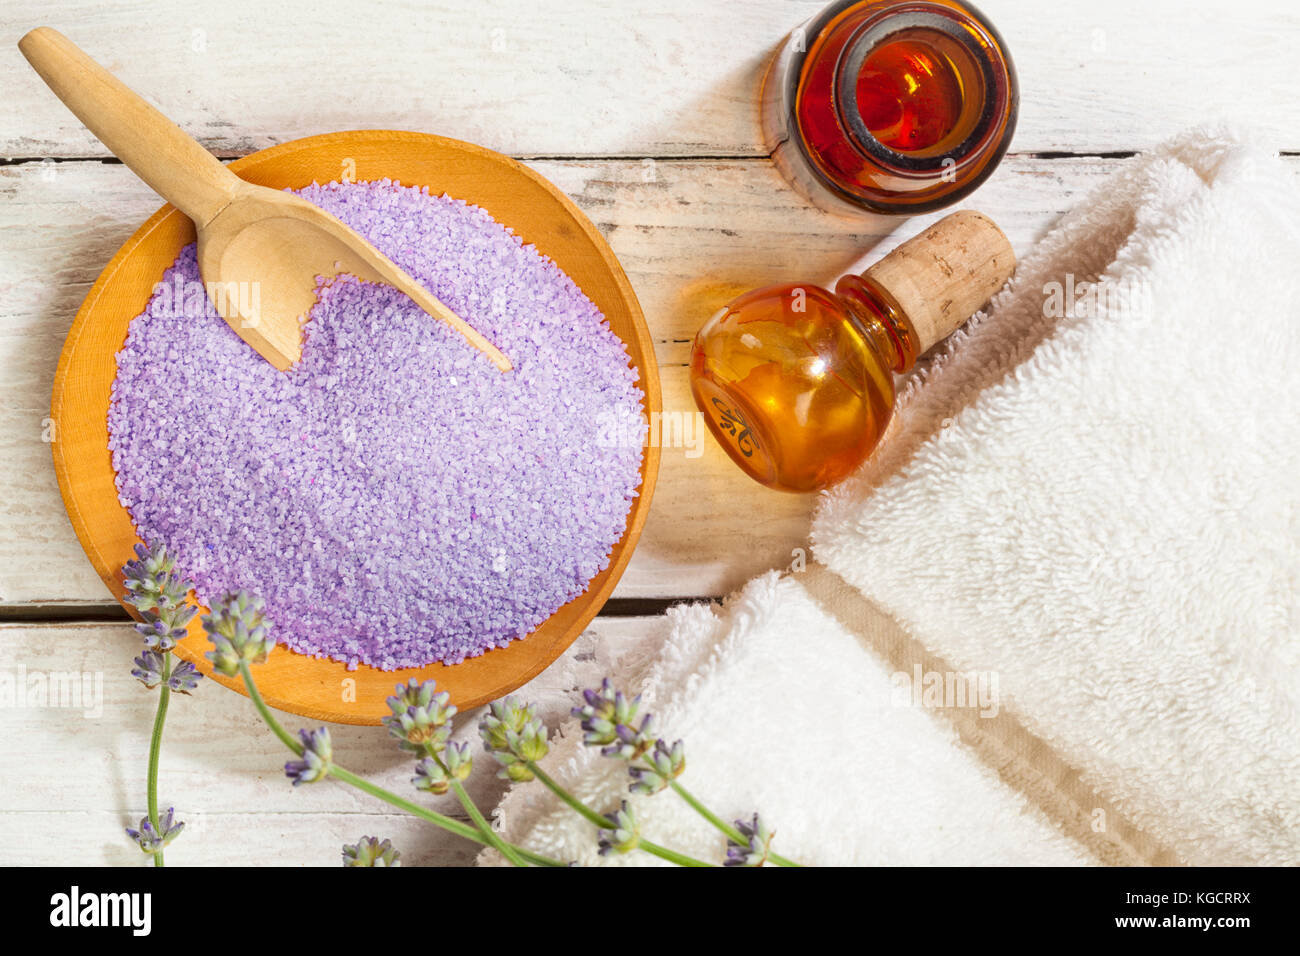 Wooden bowl of lavender bath salt with flowers, towels, apothecary bottle, birds view Stock Photo